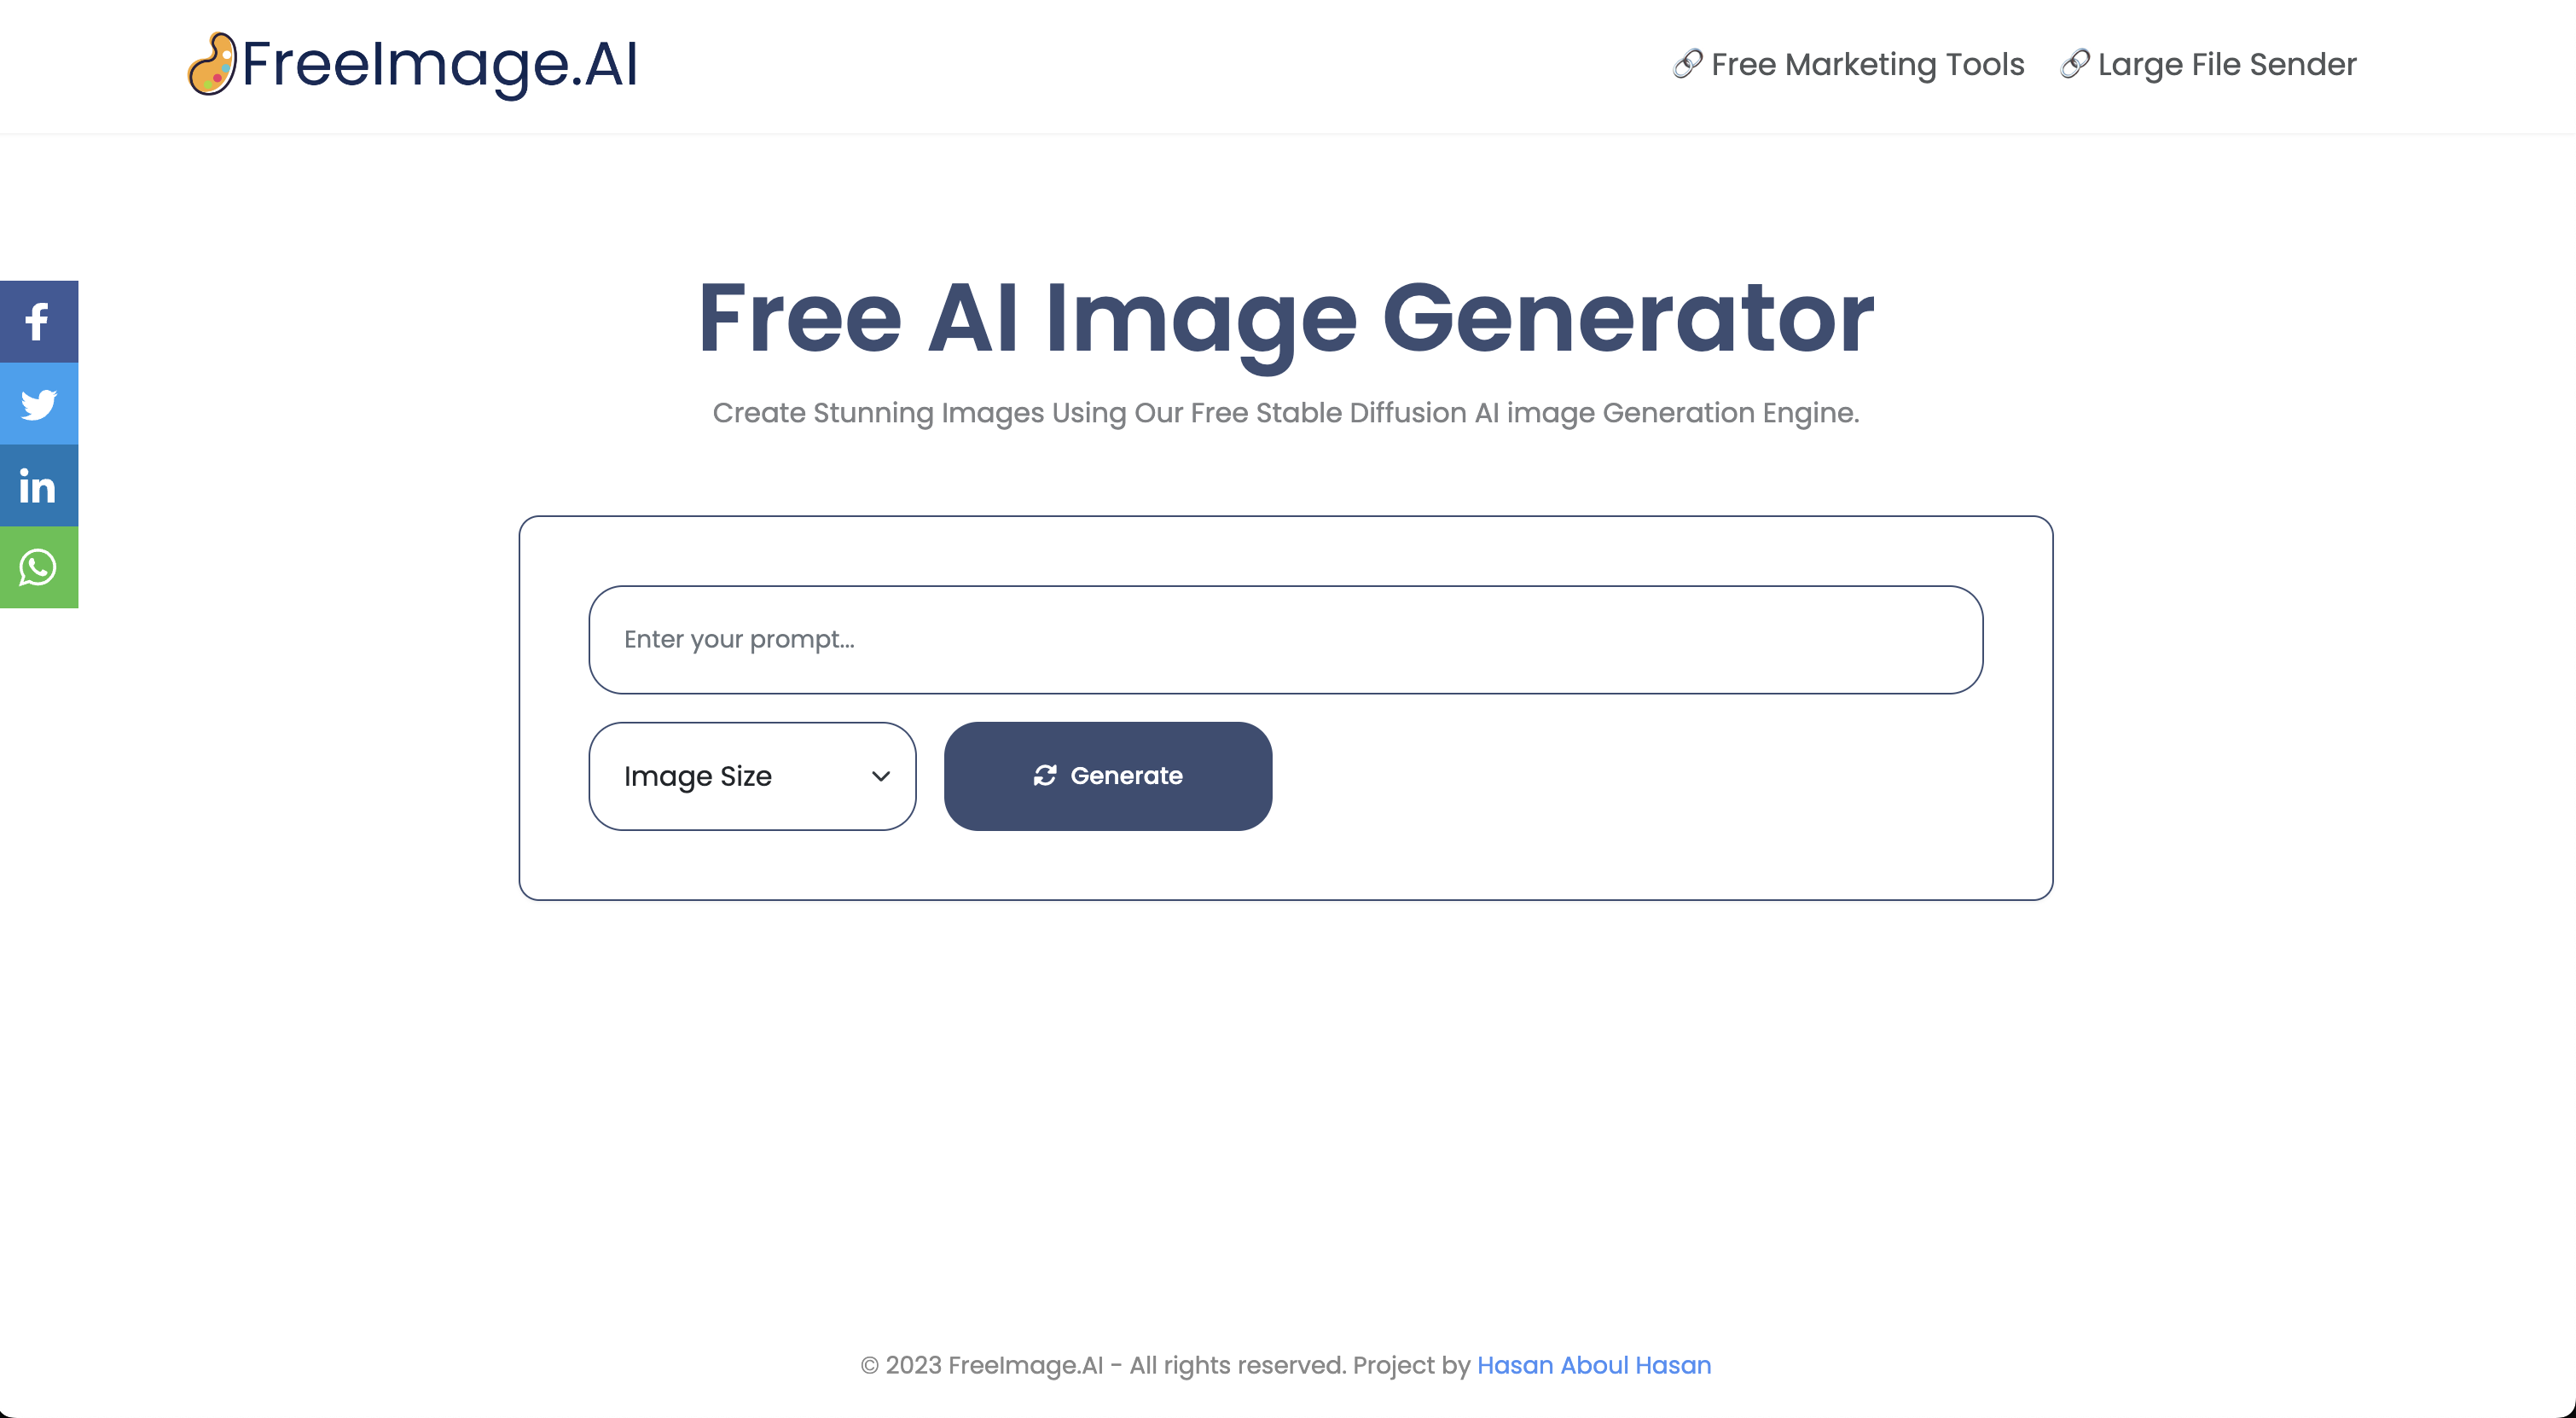 Create Quick Stunning Images for Free with Freeimage.ai – The Fast AI Image Generator